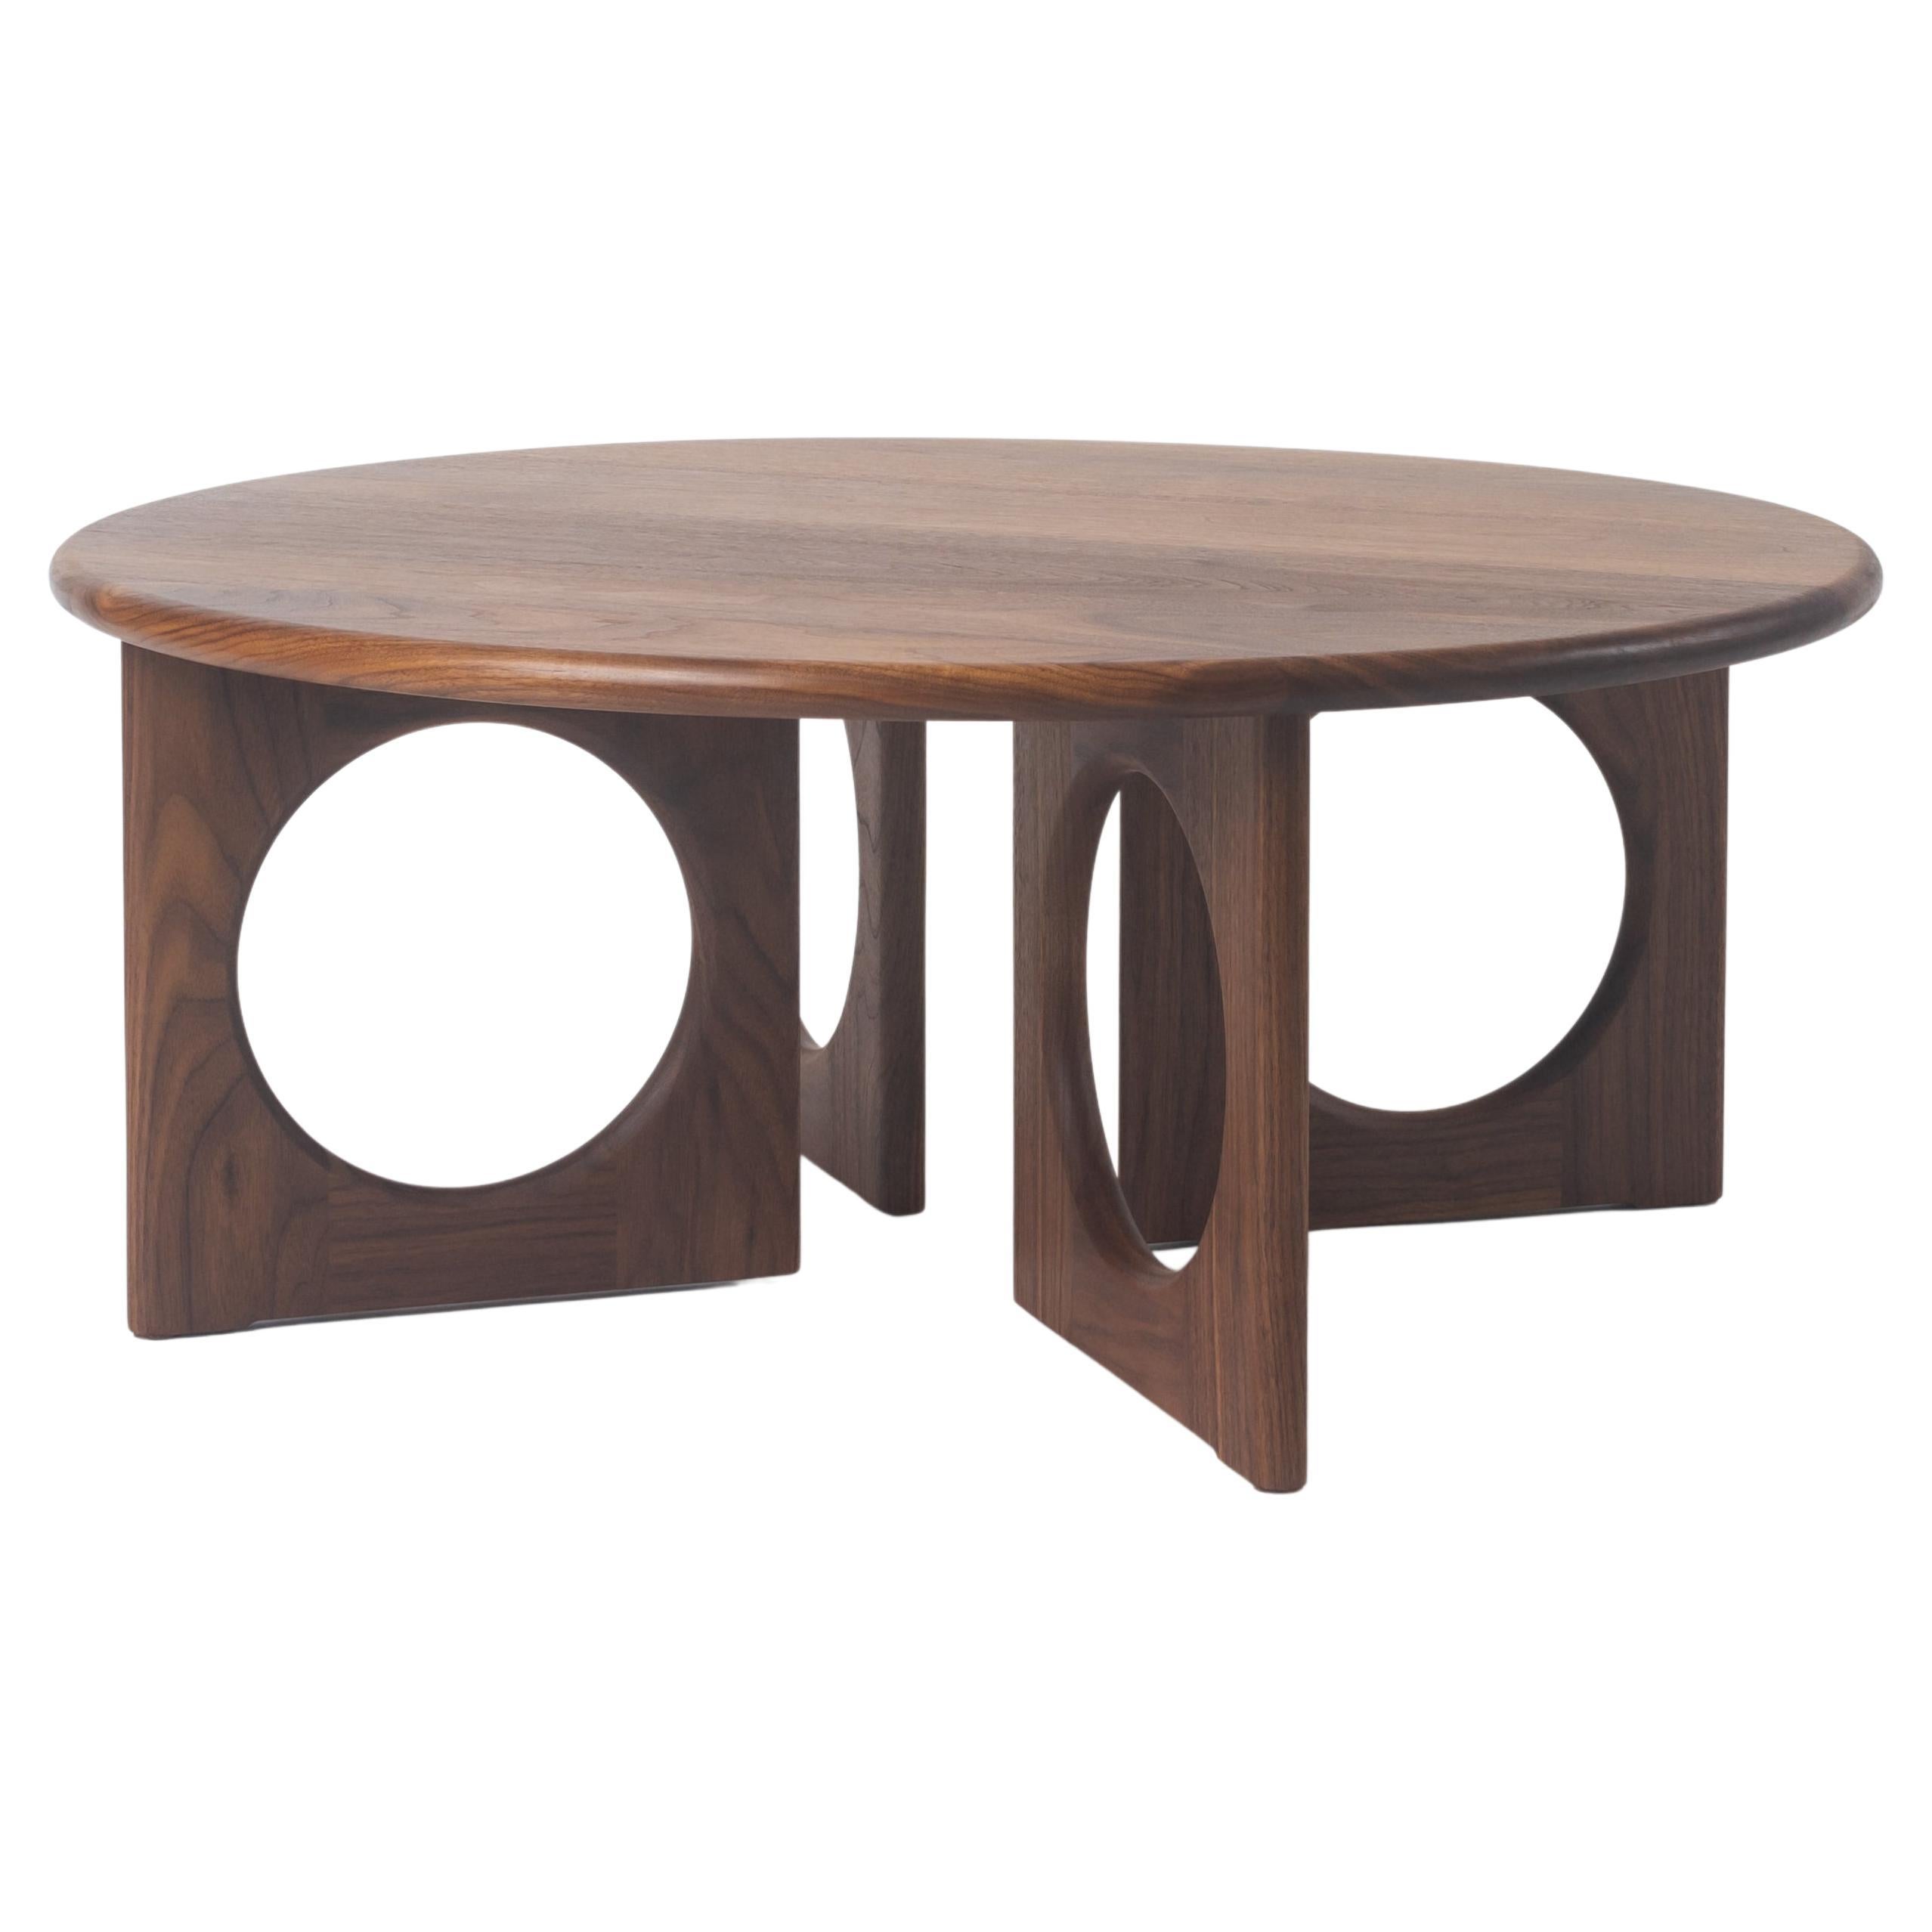 Porthole Low Table, Handcrafted Massivholz Couchtisch